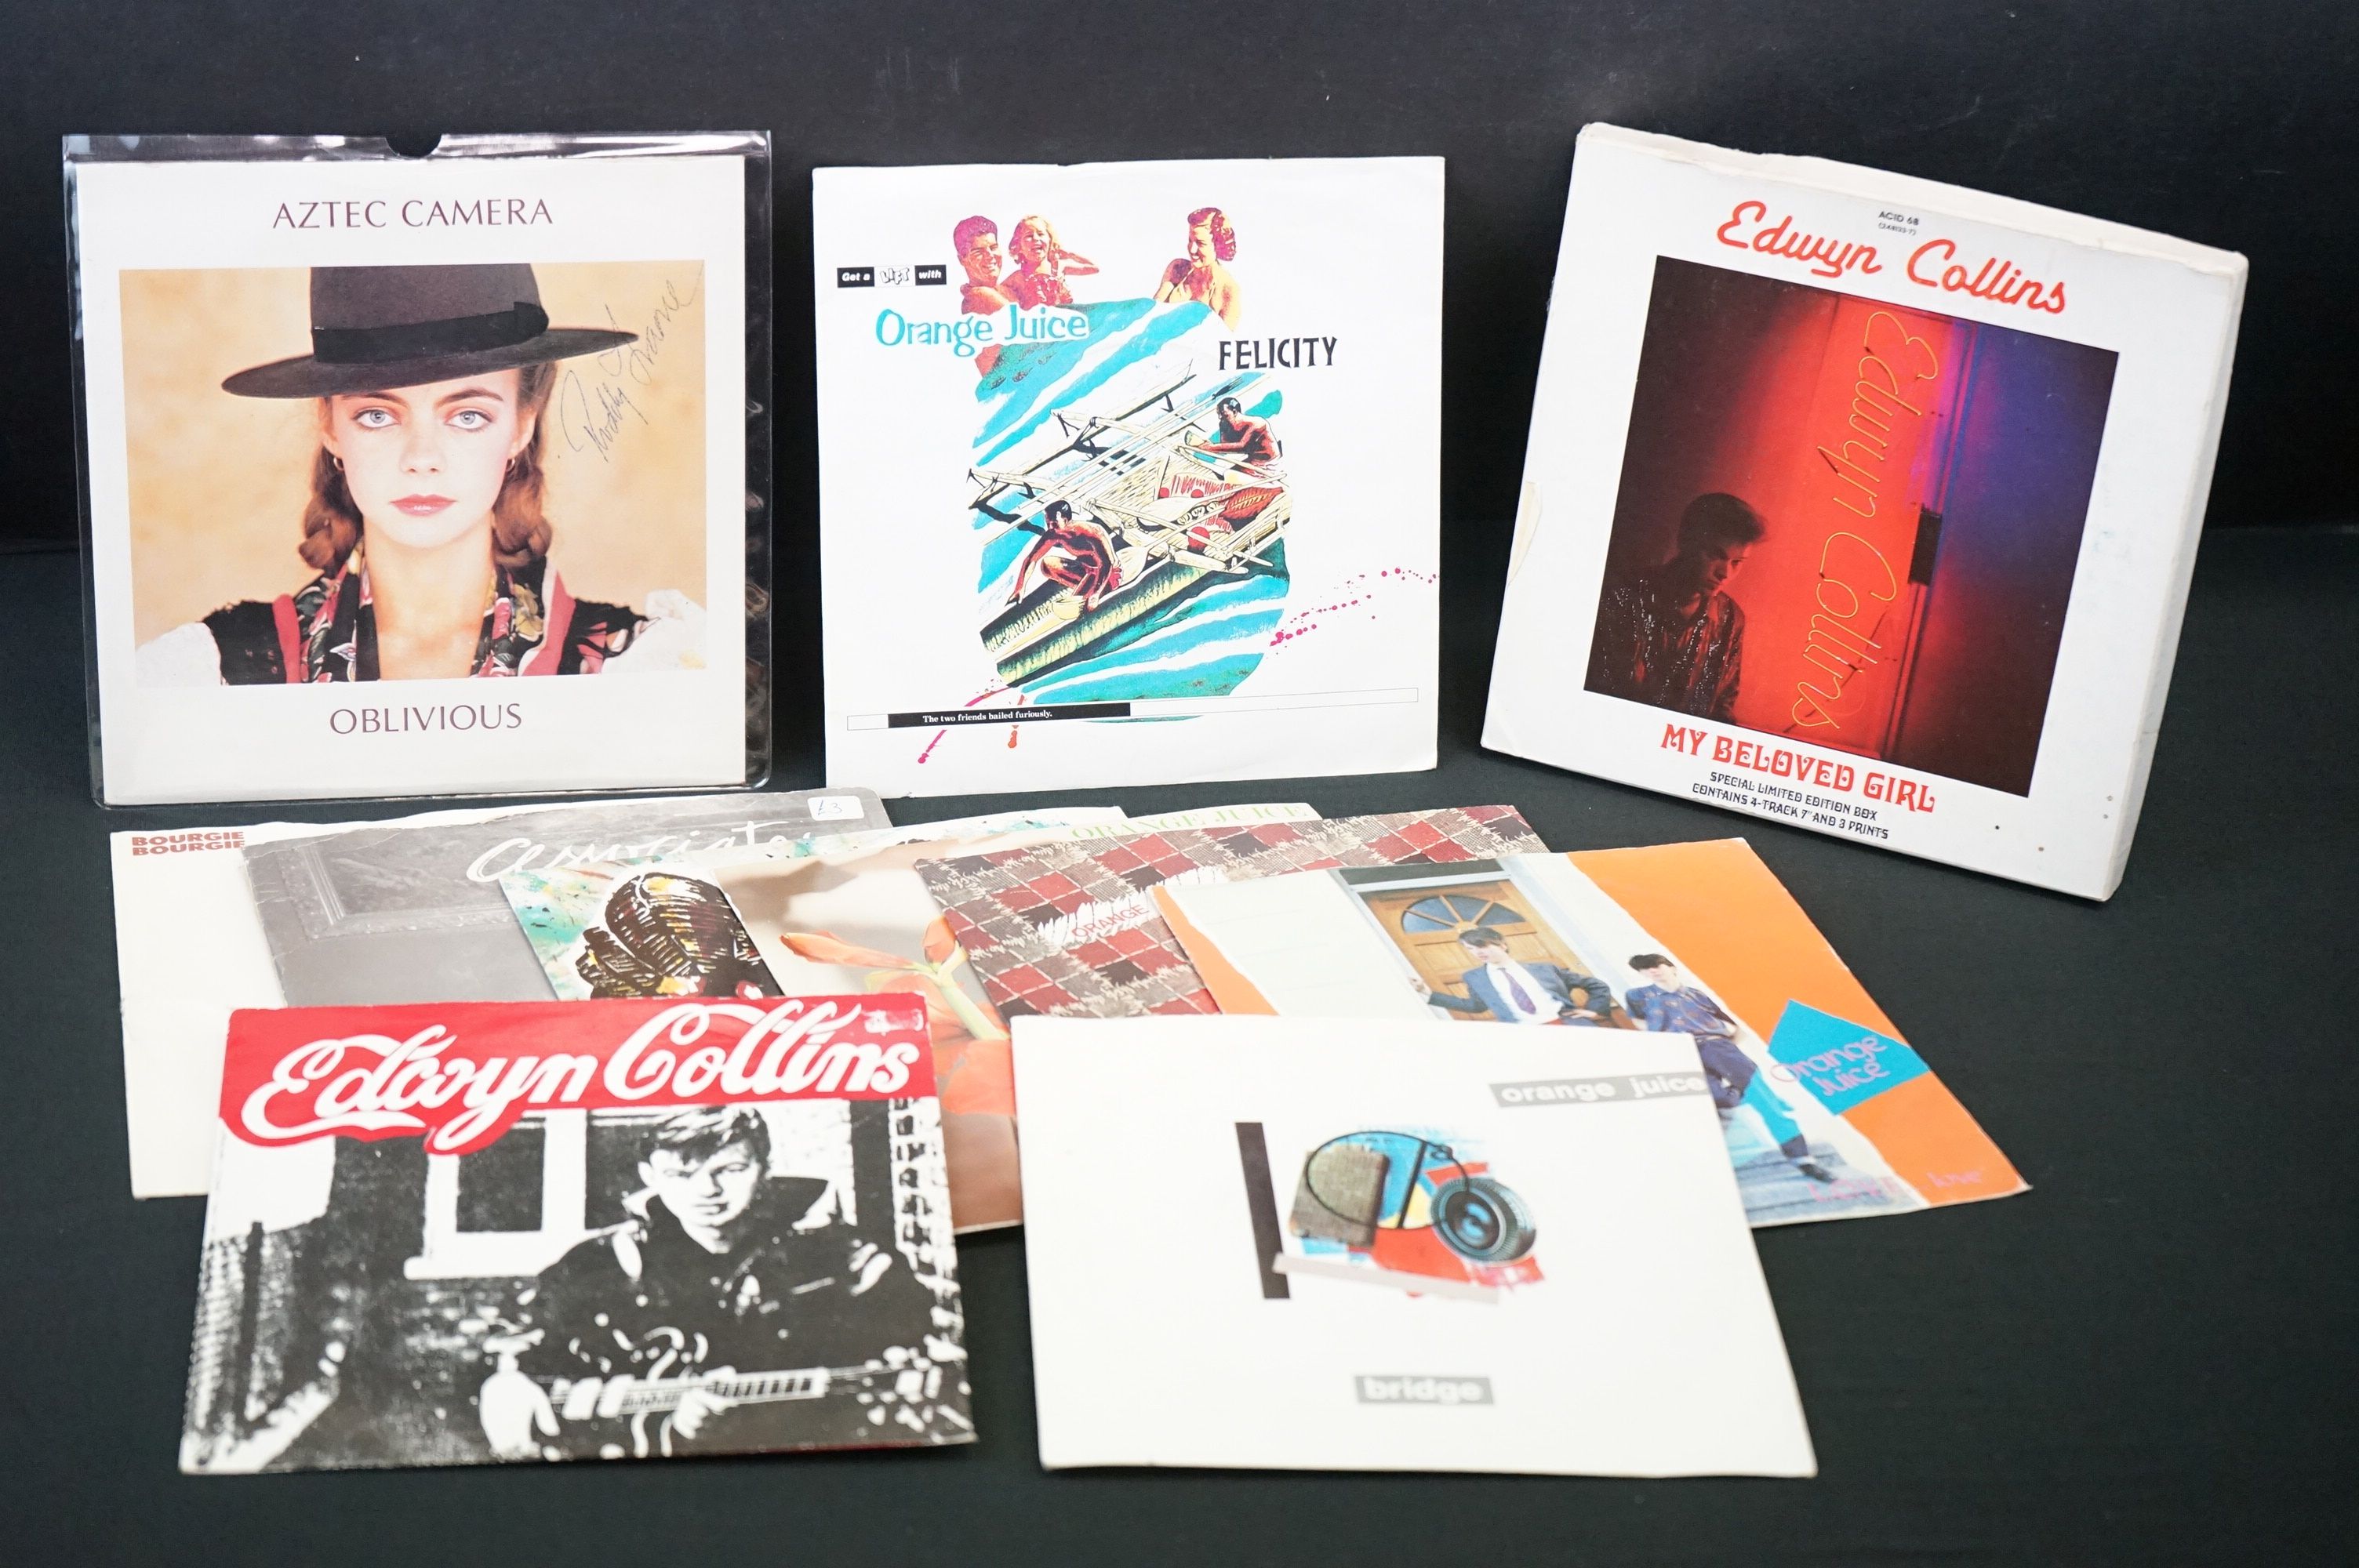 Vinyl & Autographs - 8 Scottish 7? singles and 1 box set, New Wave / Post Punk / Indie singles to